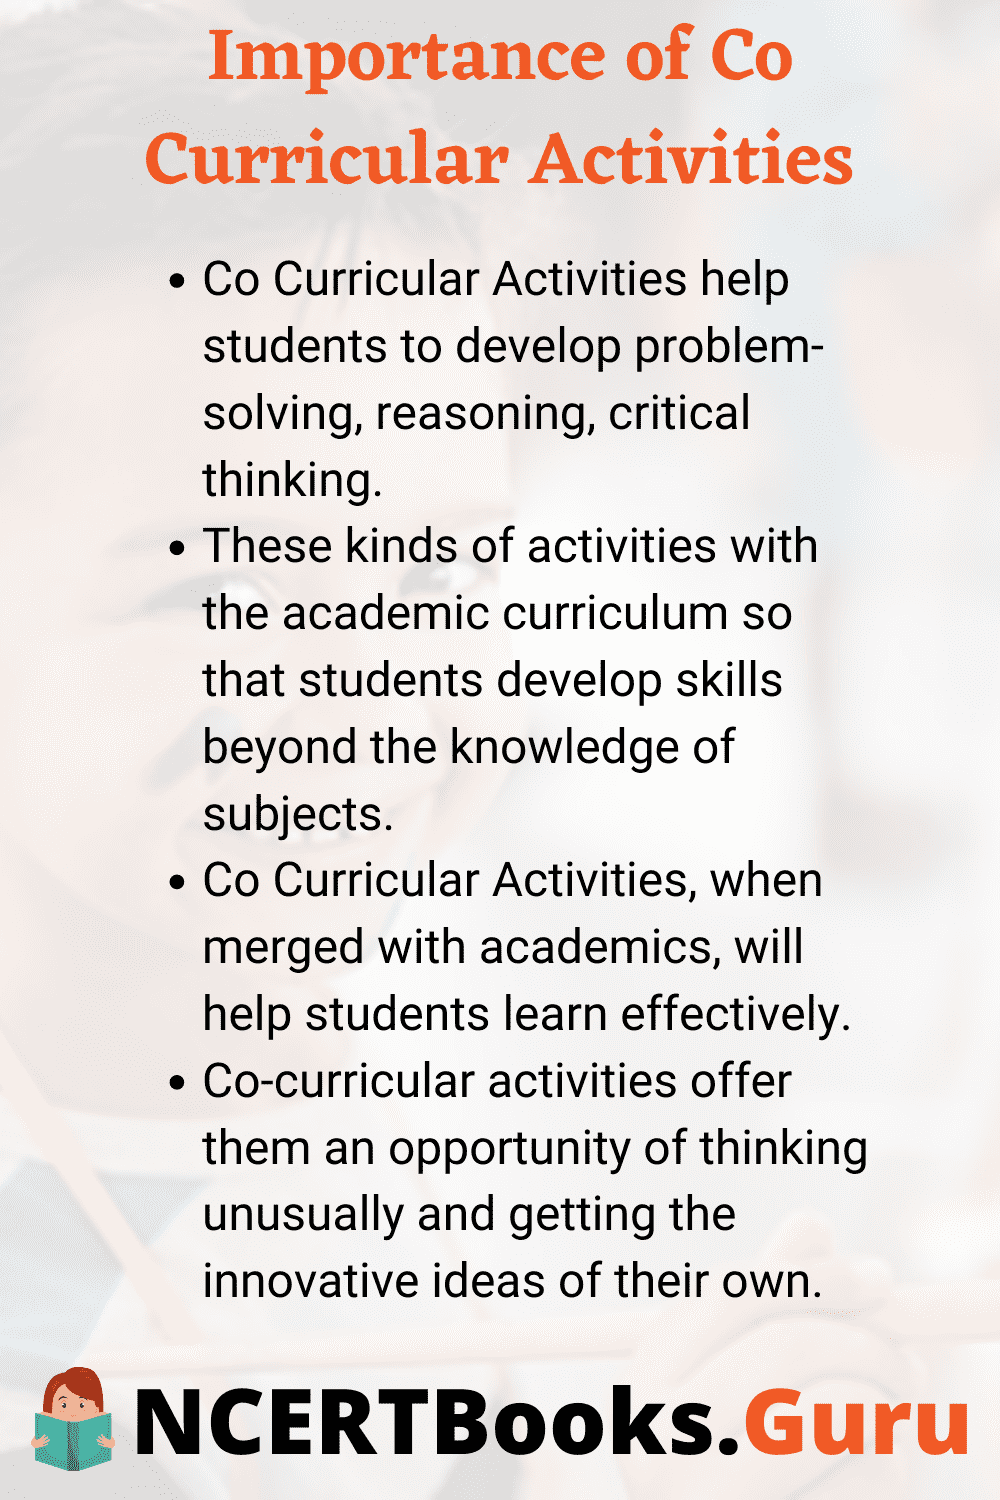 Importance of co-curricular activities